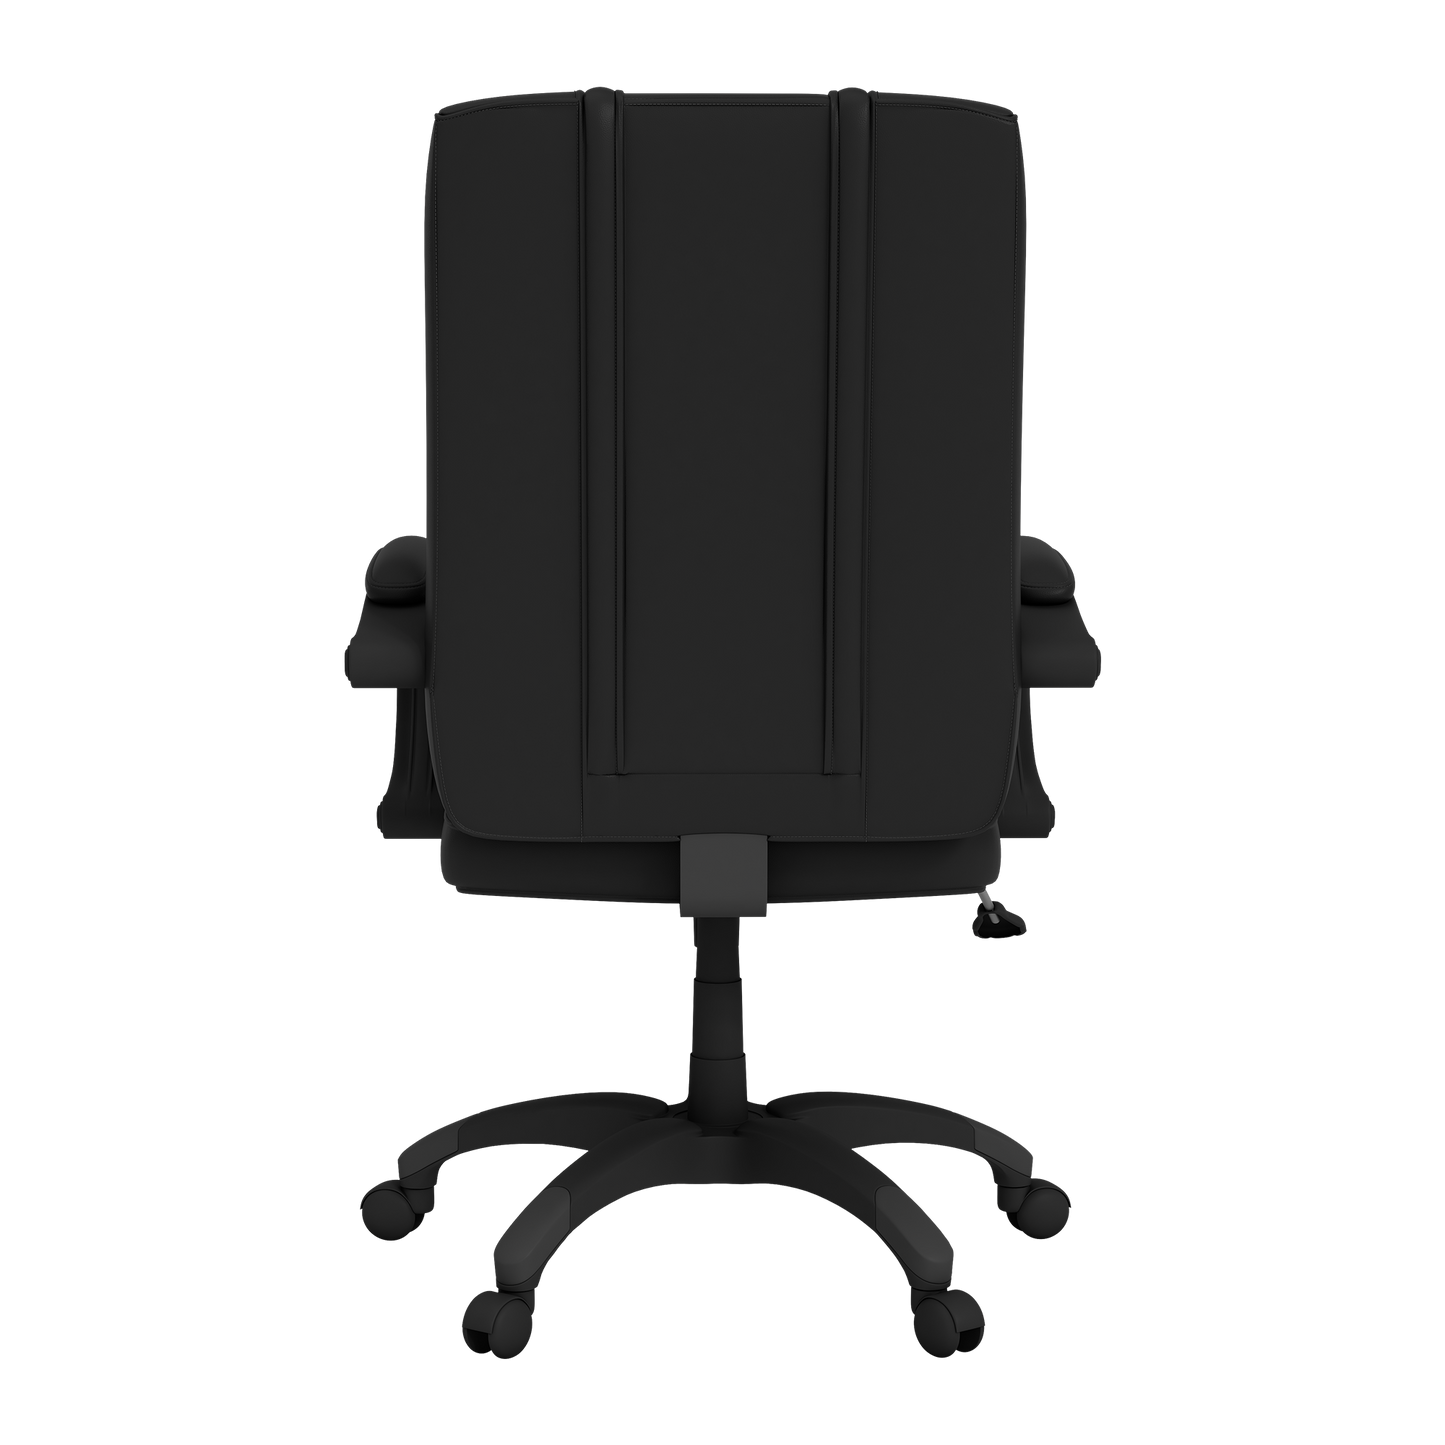 Office Chair 1000 with Tampa Bay Lightning Alternate Logo